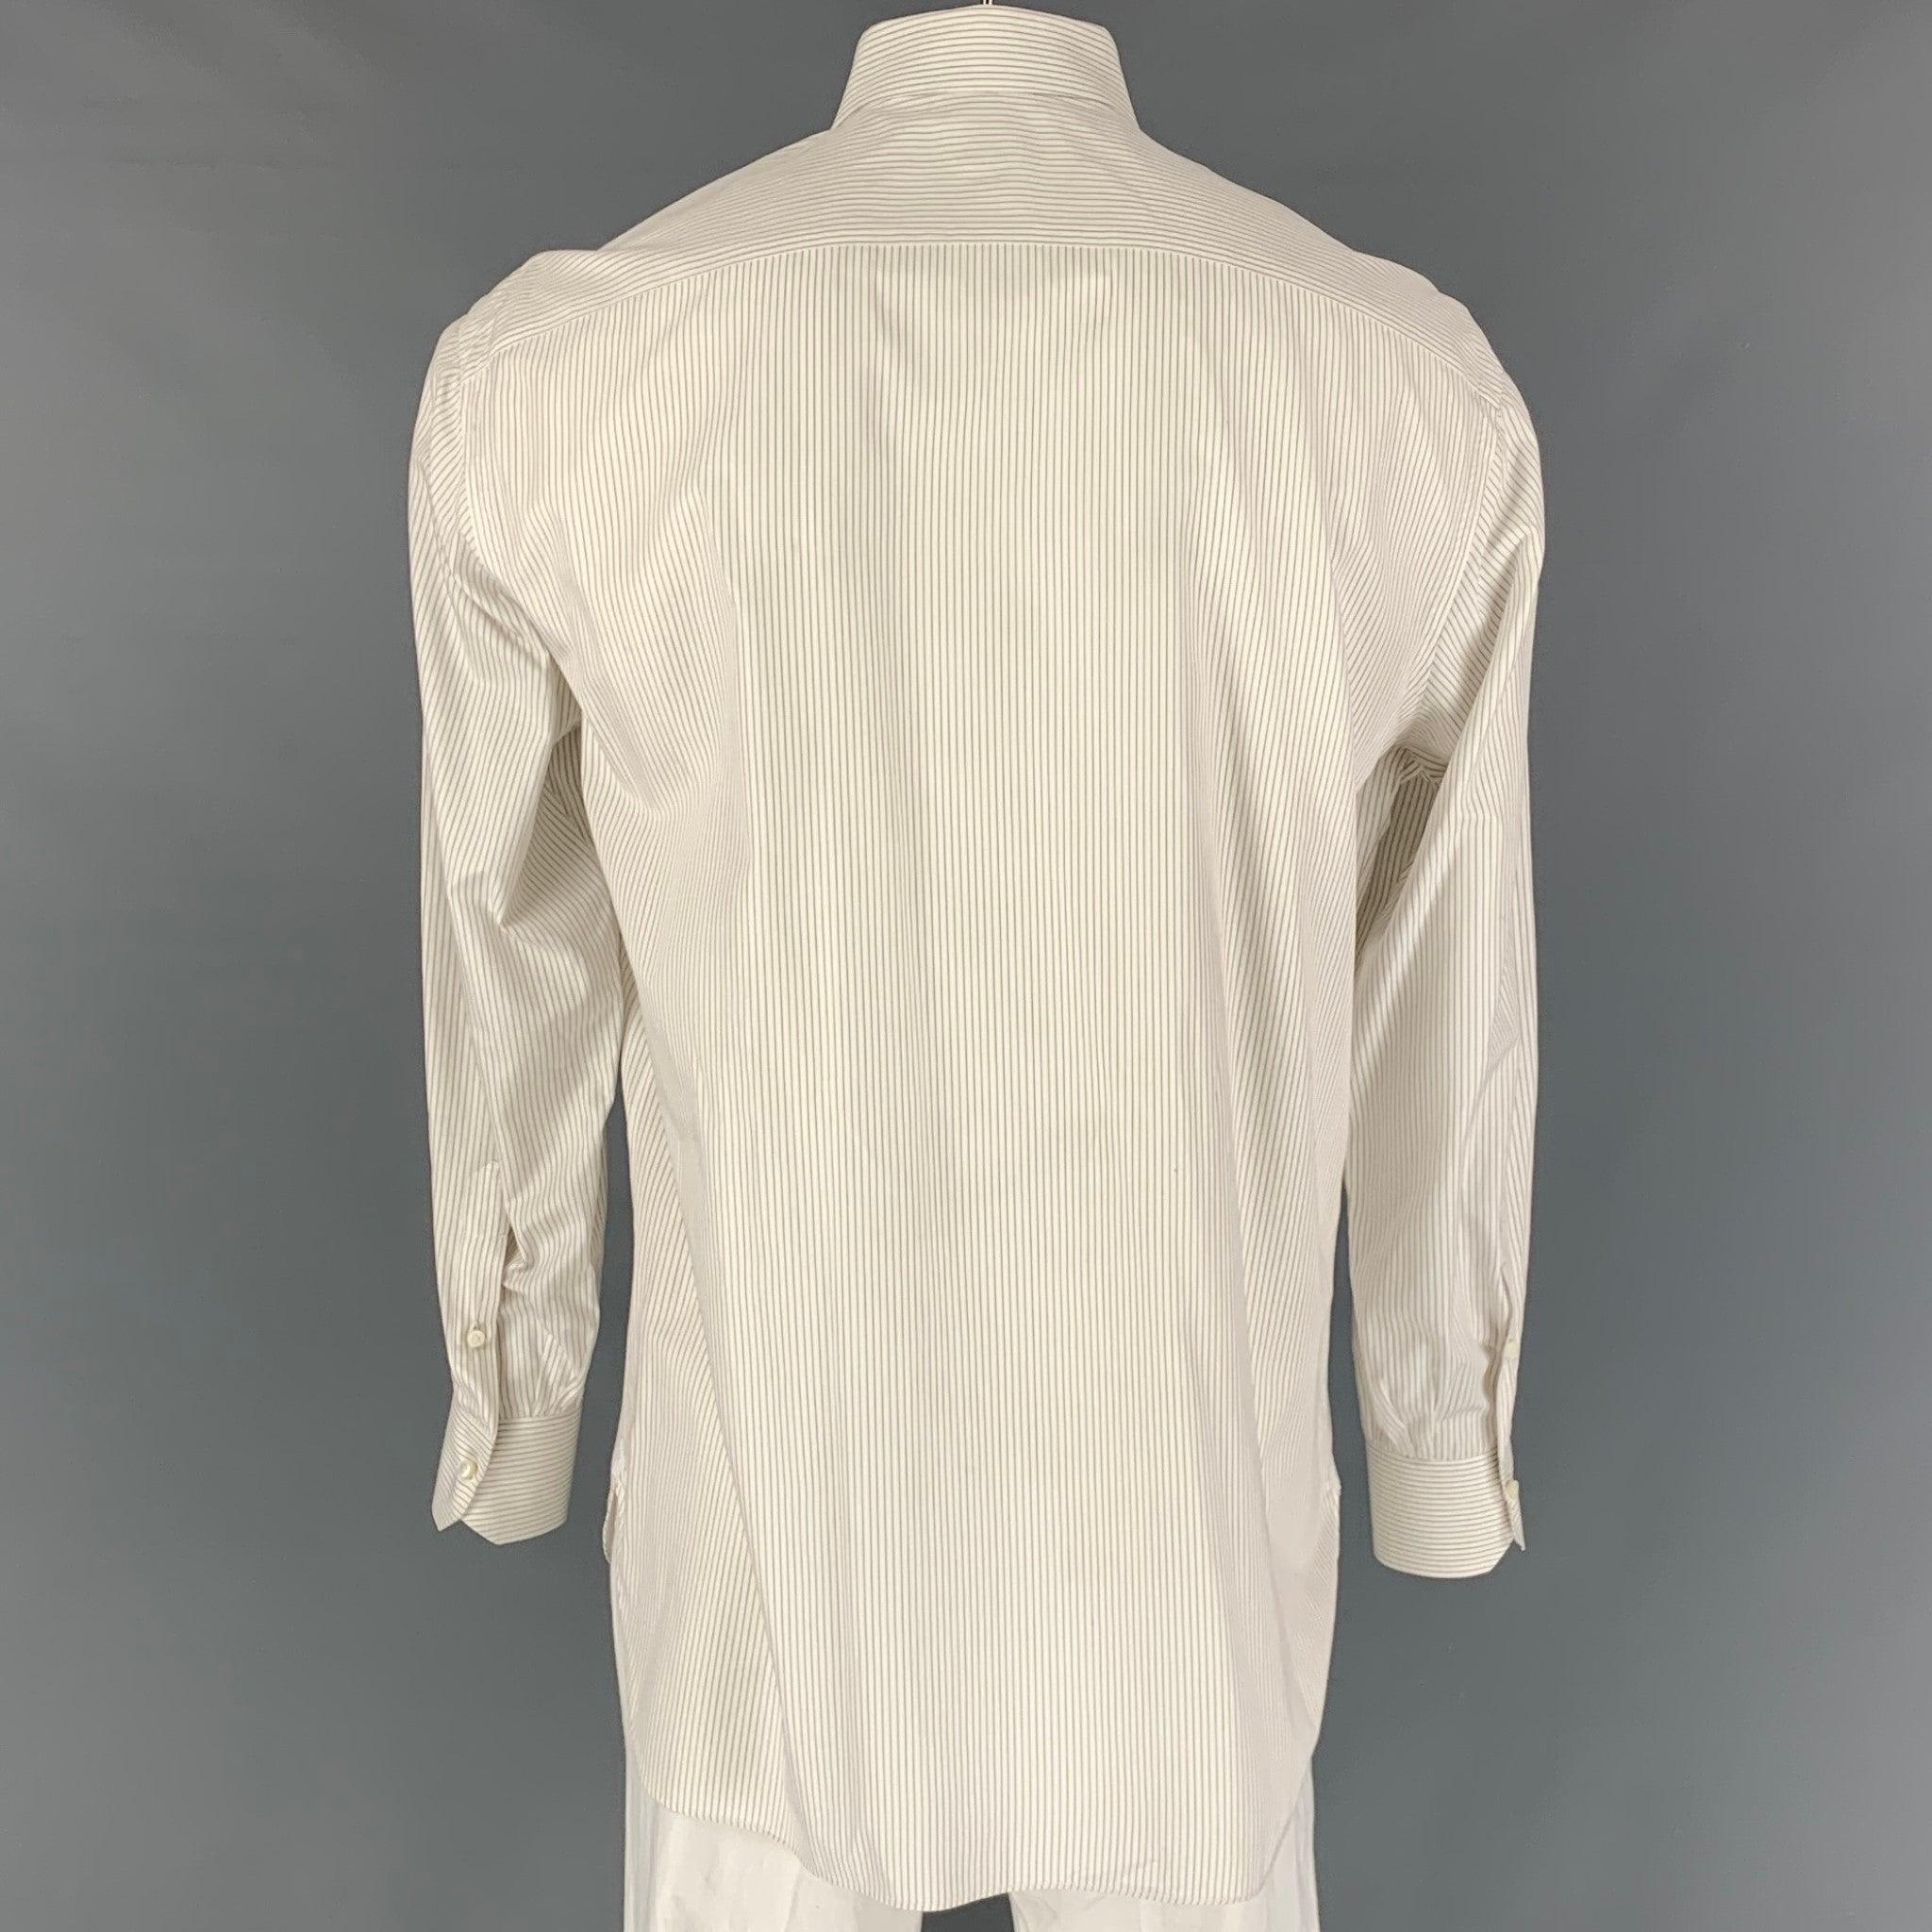 BORRELLI Size L White Stripe Cotton Button Up  Long Sleeve Shirt In Good Condition For Sale In San Francisco, CA